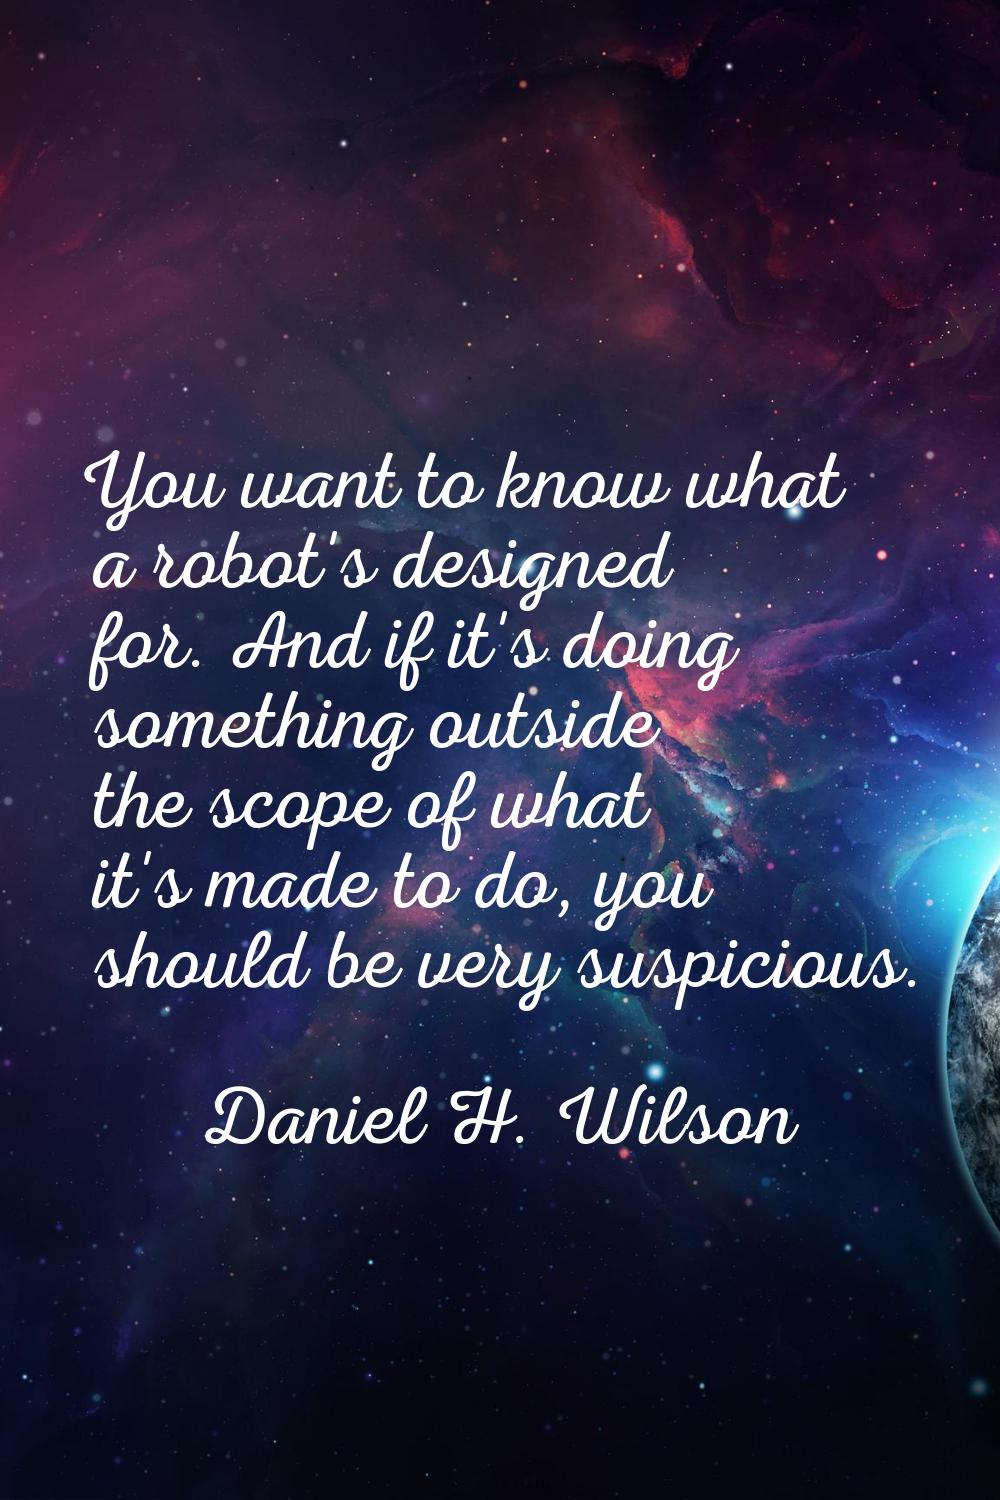 You want to know what a robot's designed for. And if it's doing something outside the scope of what